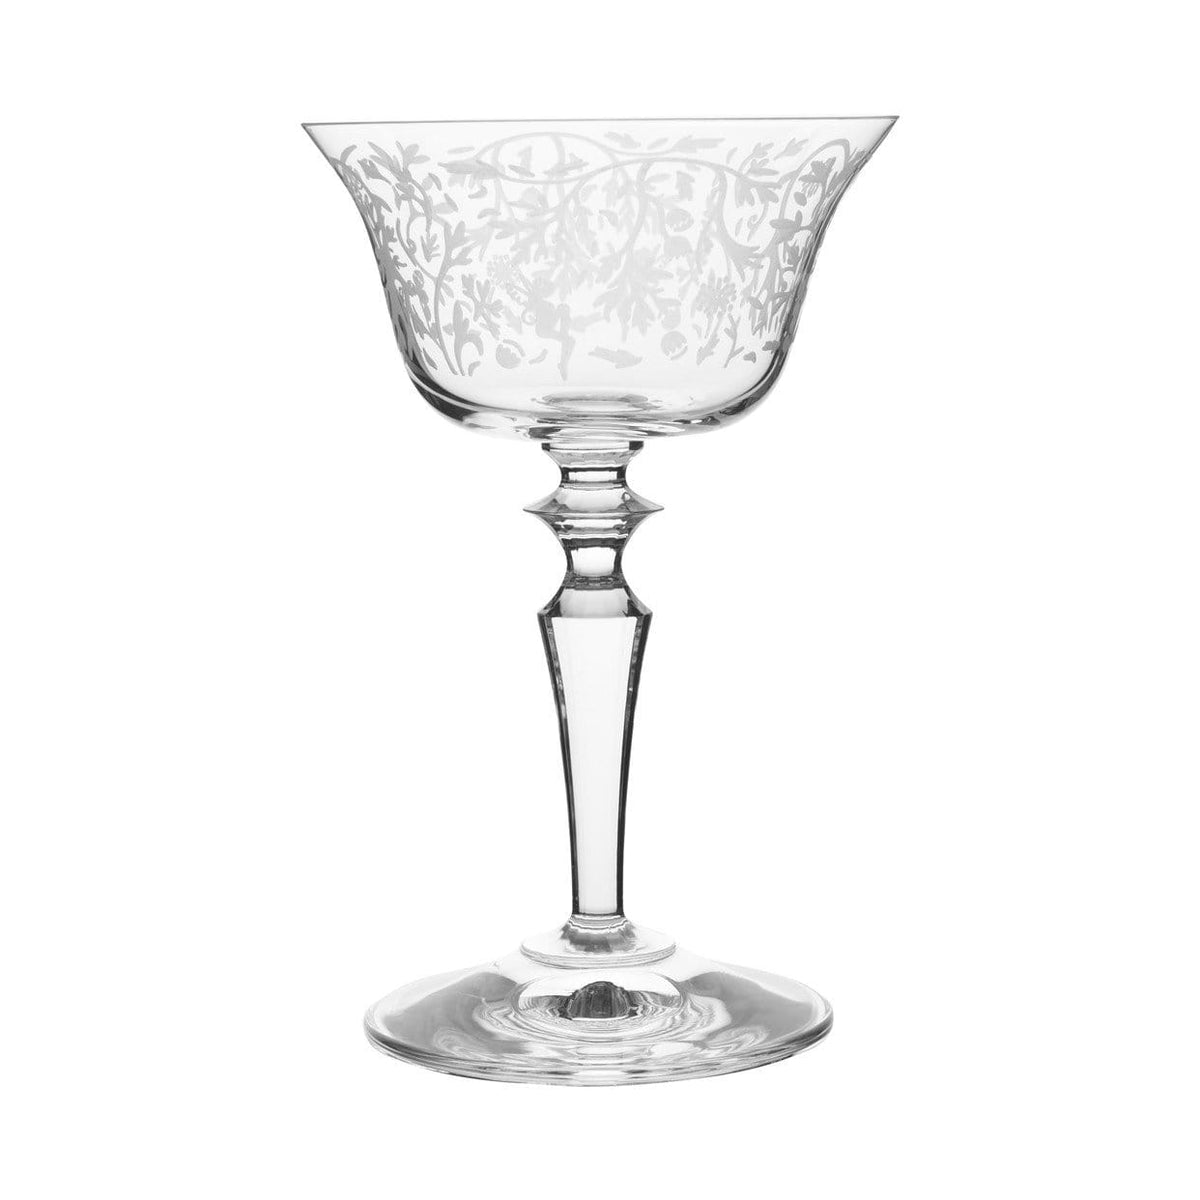 A wide variety of Wormwood Presidente Glass with Pattern (Set of 6)  Wormwood is available